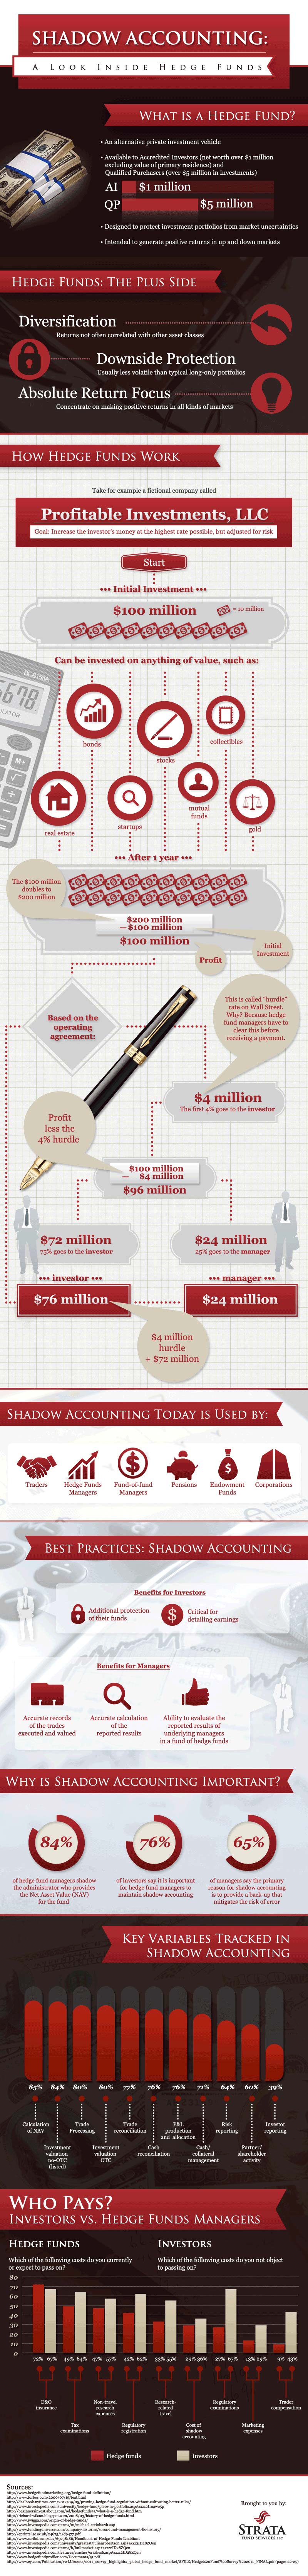 Shadow Accounting Hedge Funds-Infographic